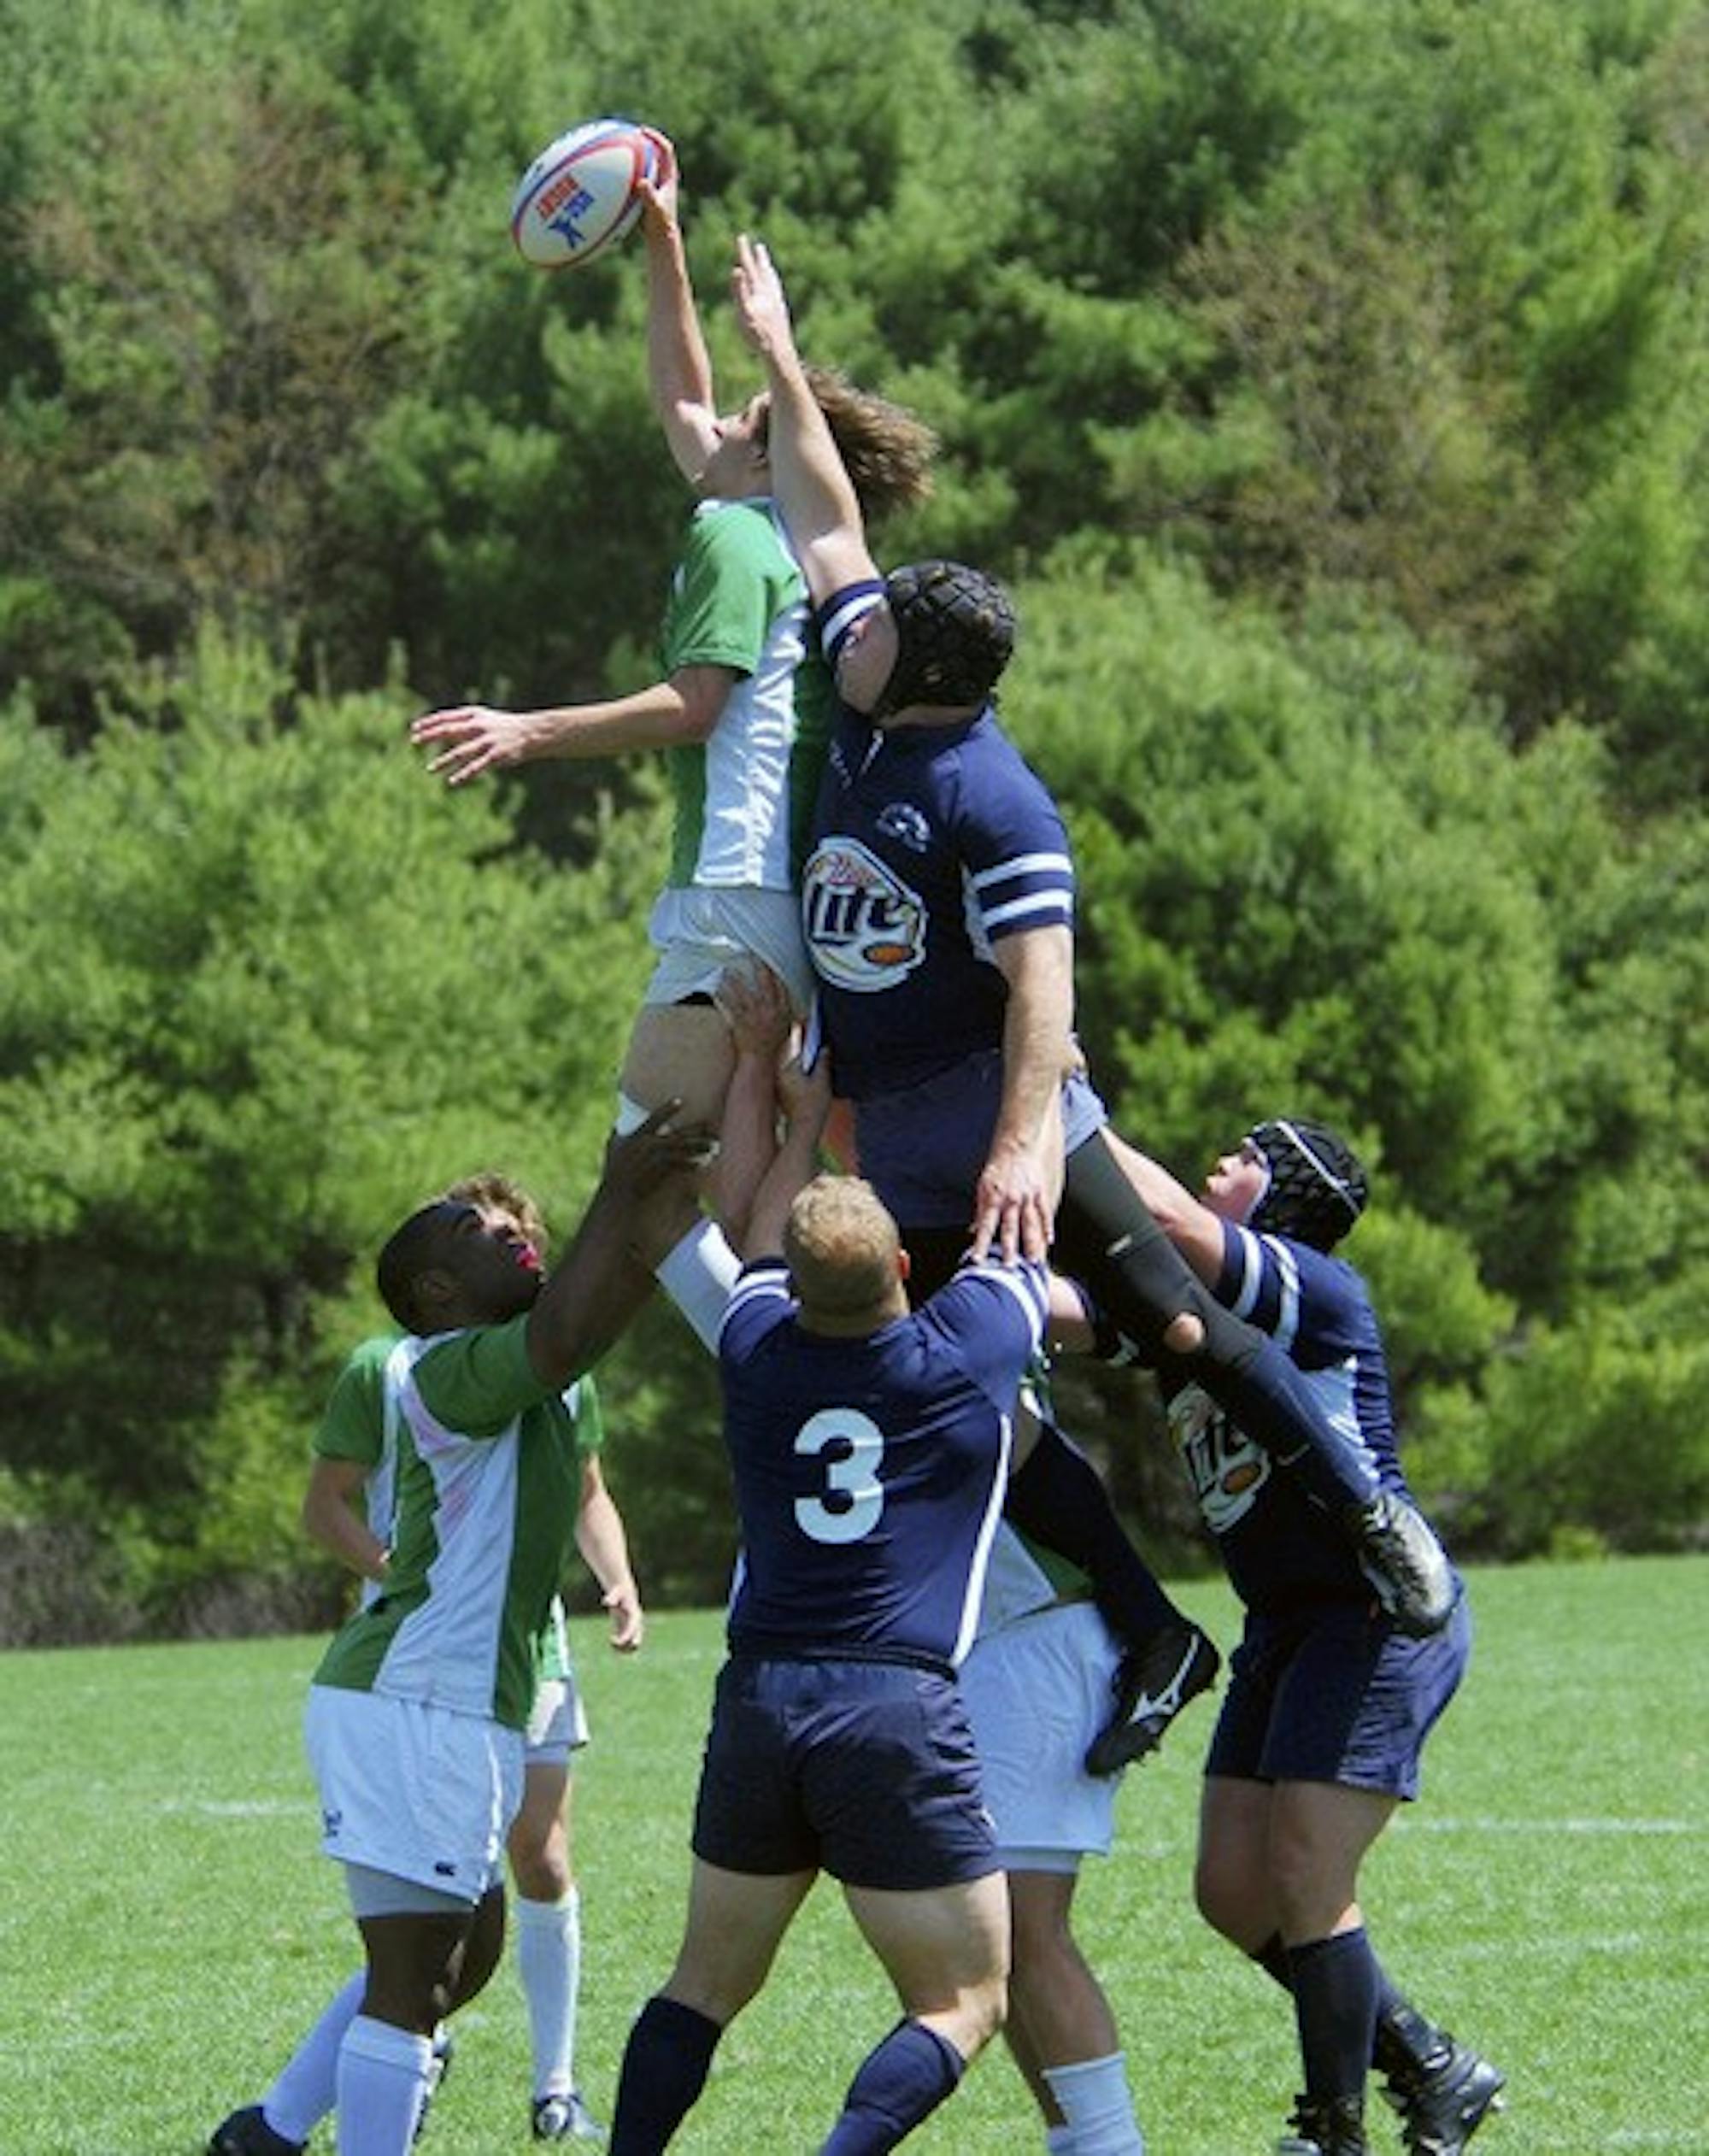 The Big Green grabs control of the ball on a lineout in early season action.